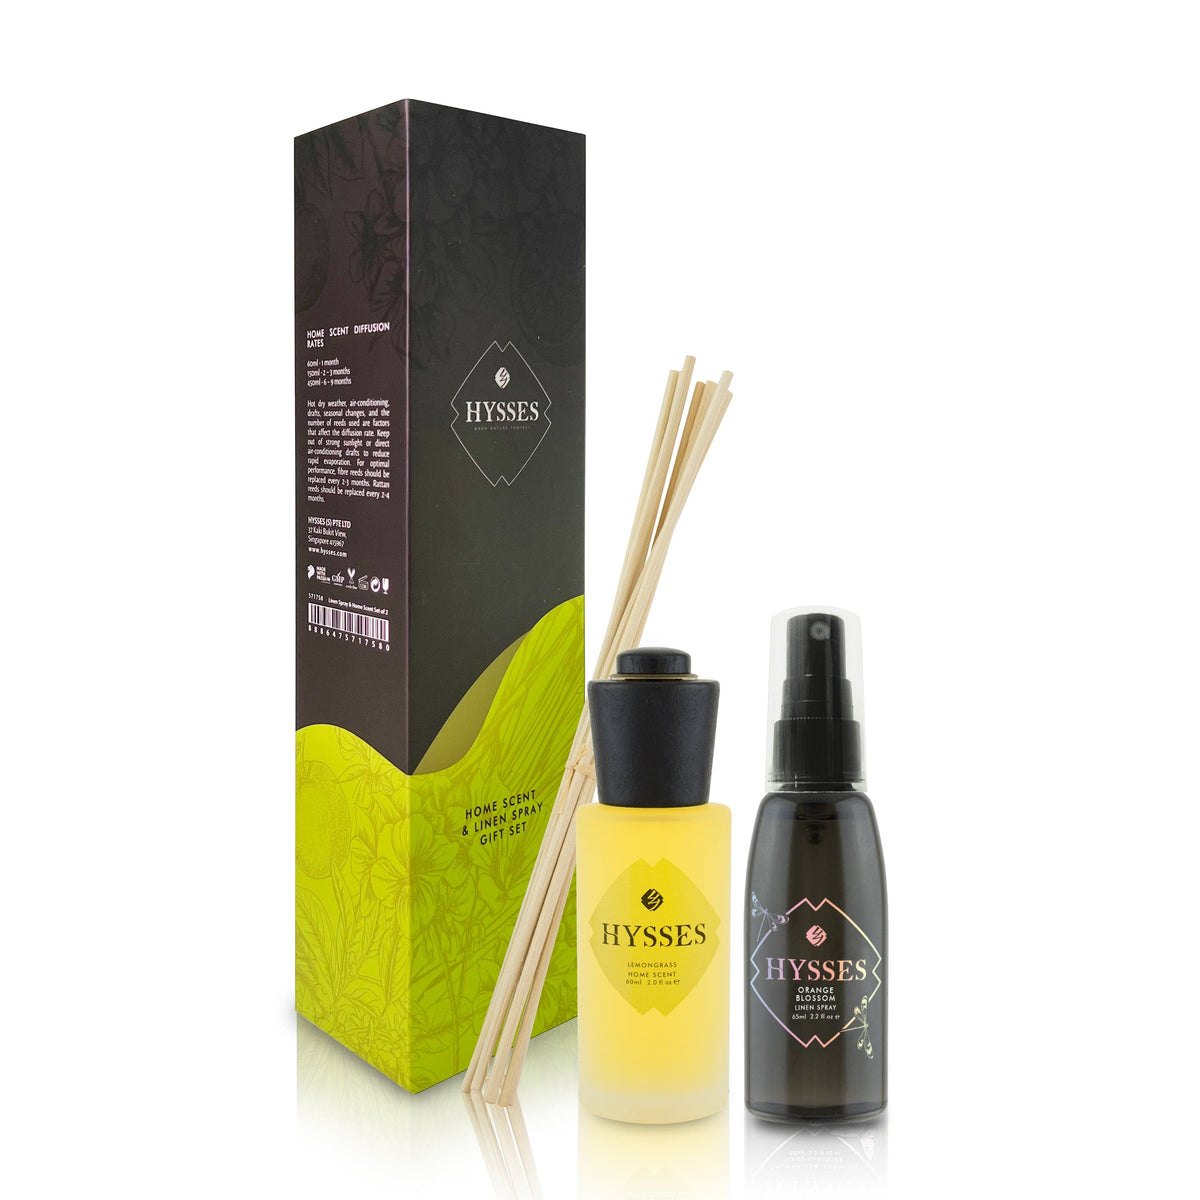 Hysses Home Scents Orange Blossom &amp; Lemongrass Linen Spray and Home Scent Gift Set of 2